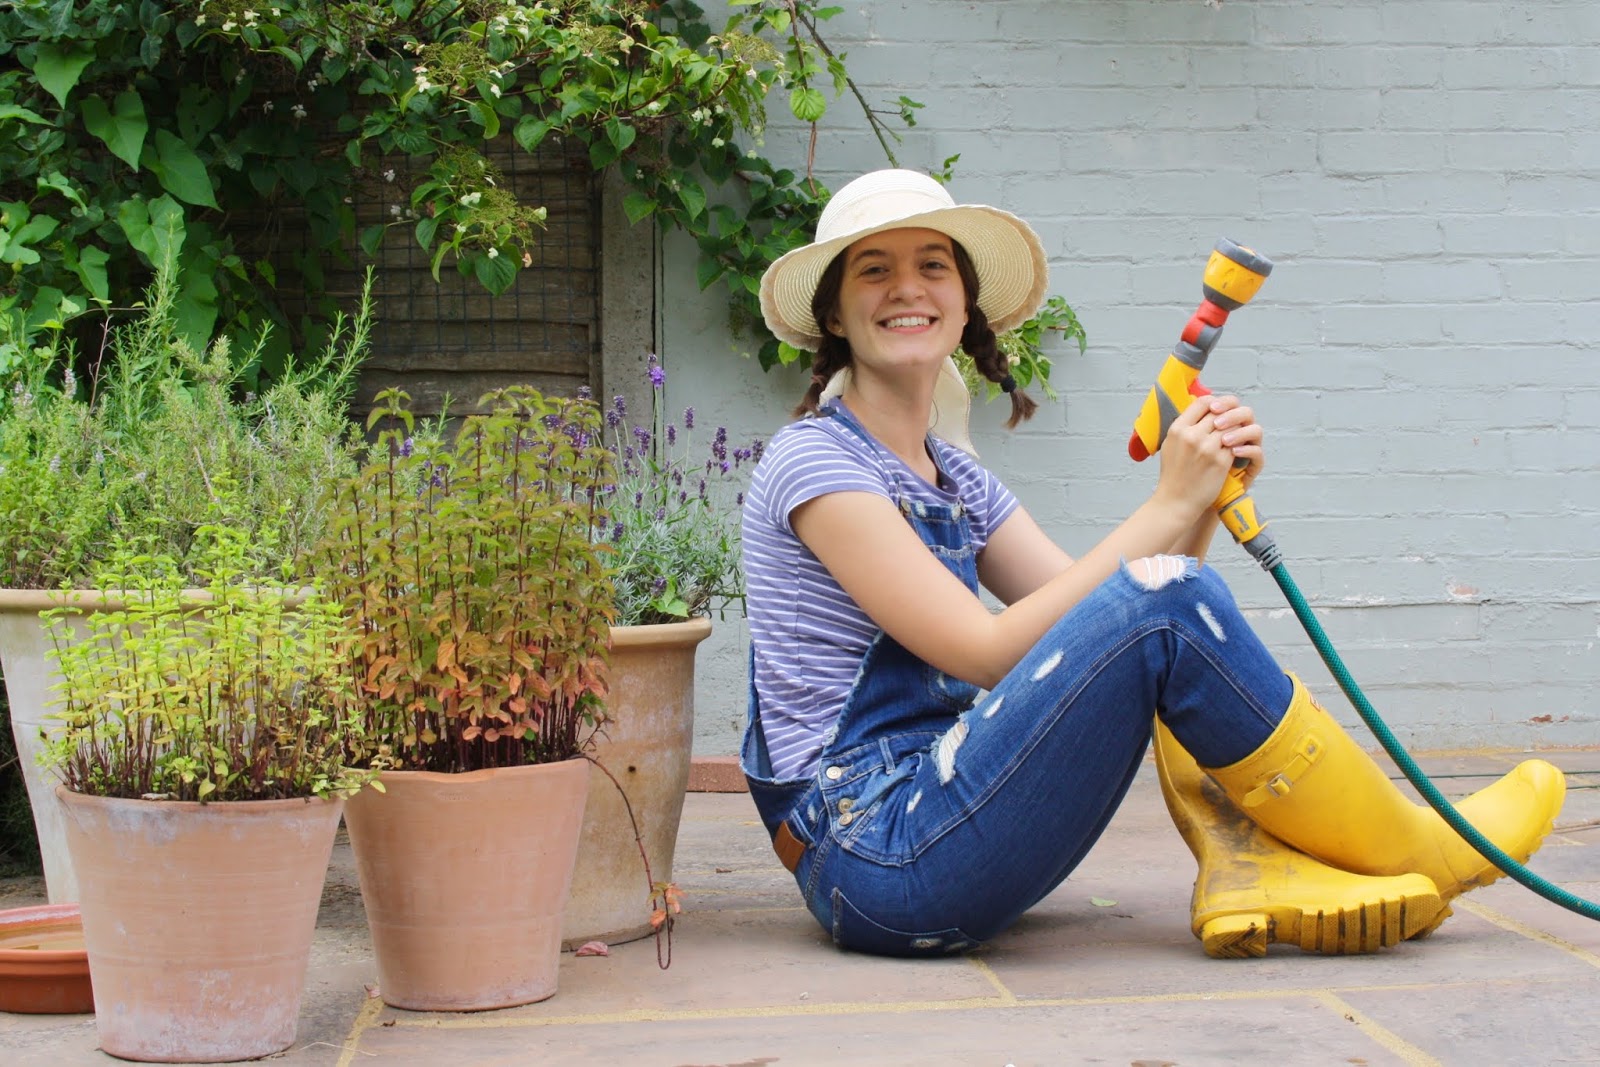 Abbey, wearing blue dungarees and a straw hat, sits among pot plants in a garden, holding a yellow hose